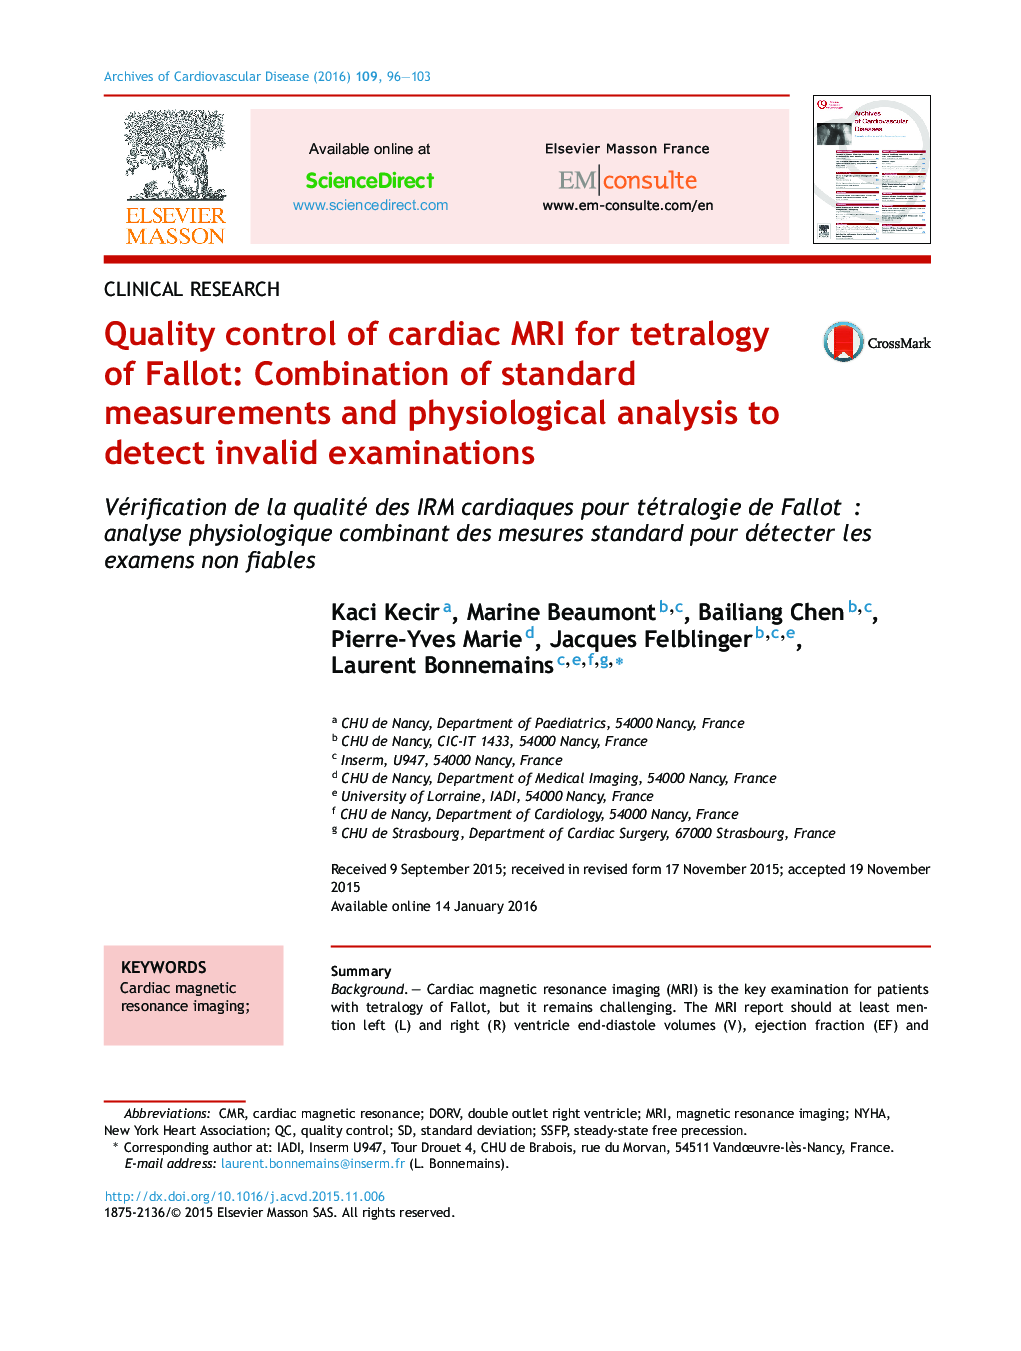 Quality control of cardiac MRI for tetralogy of Fallot: Combination of standard measurements and physiological analysis to detect invalid examinations